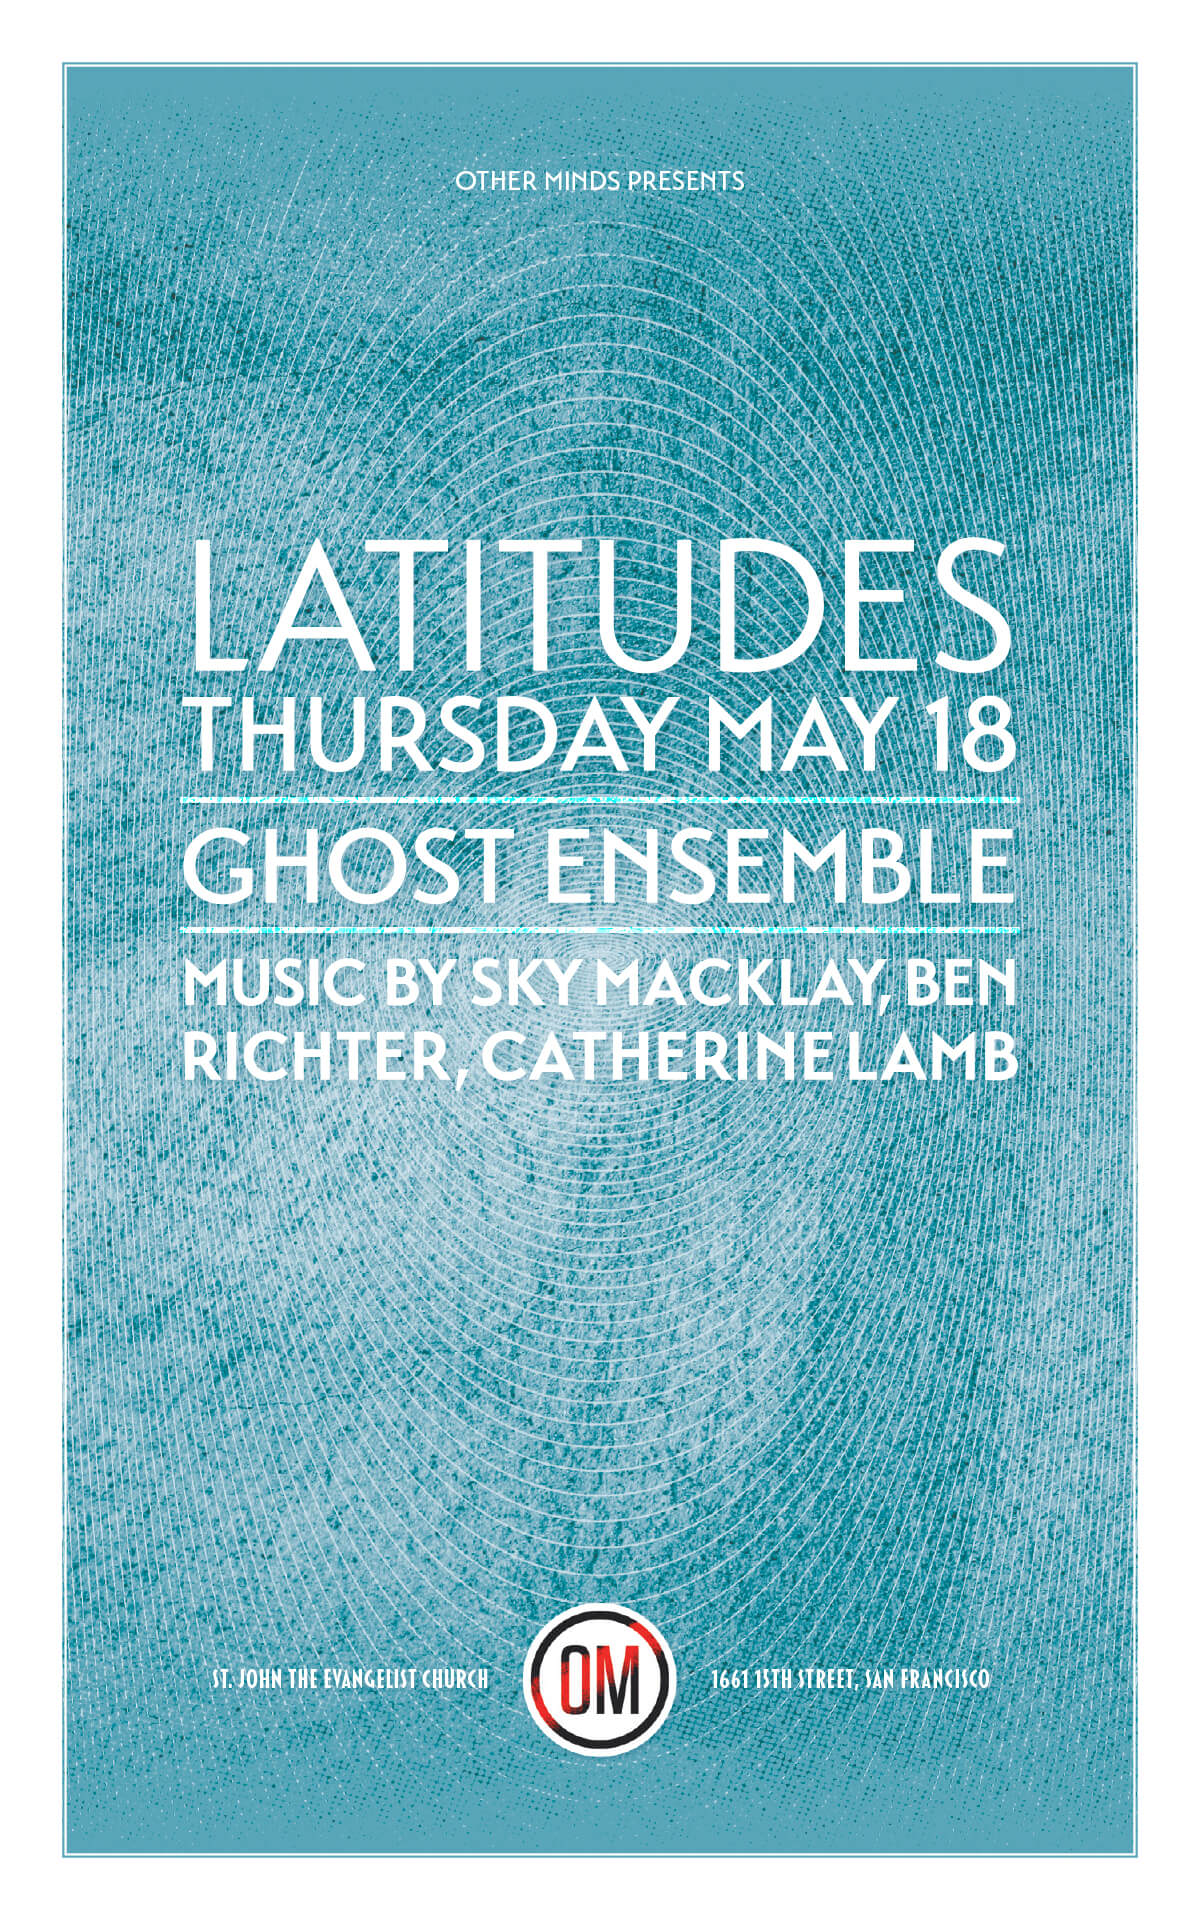 Latitudes Thursday May 18 Ghost Ensemble, Music by Sky Macklay, Ben Richter, Catherine Lamb